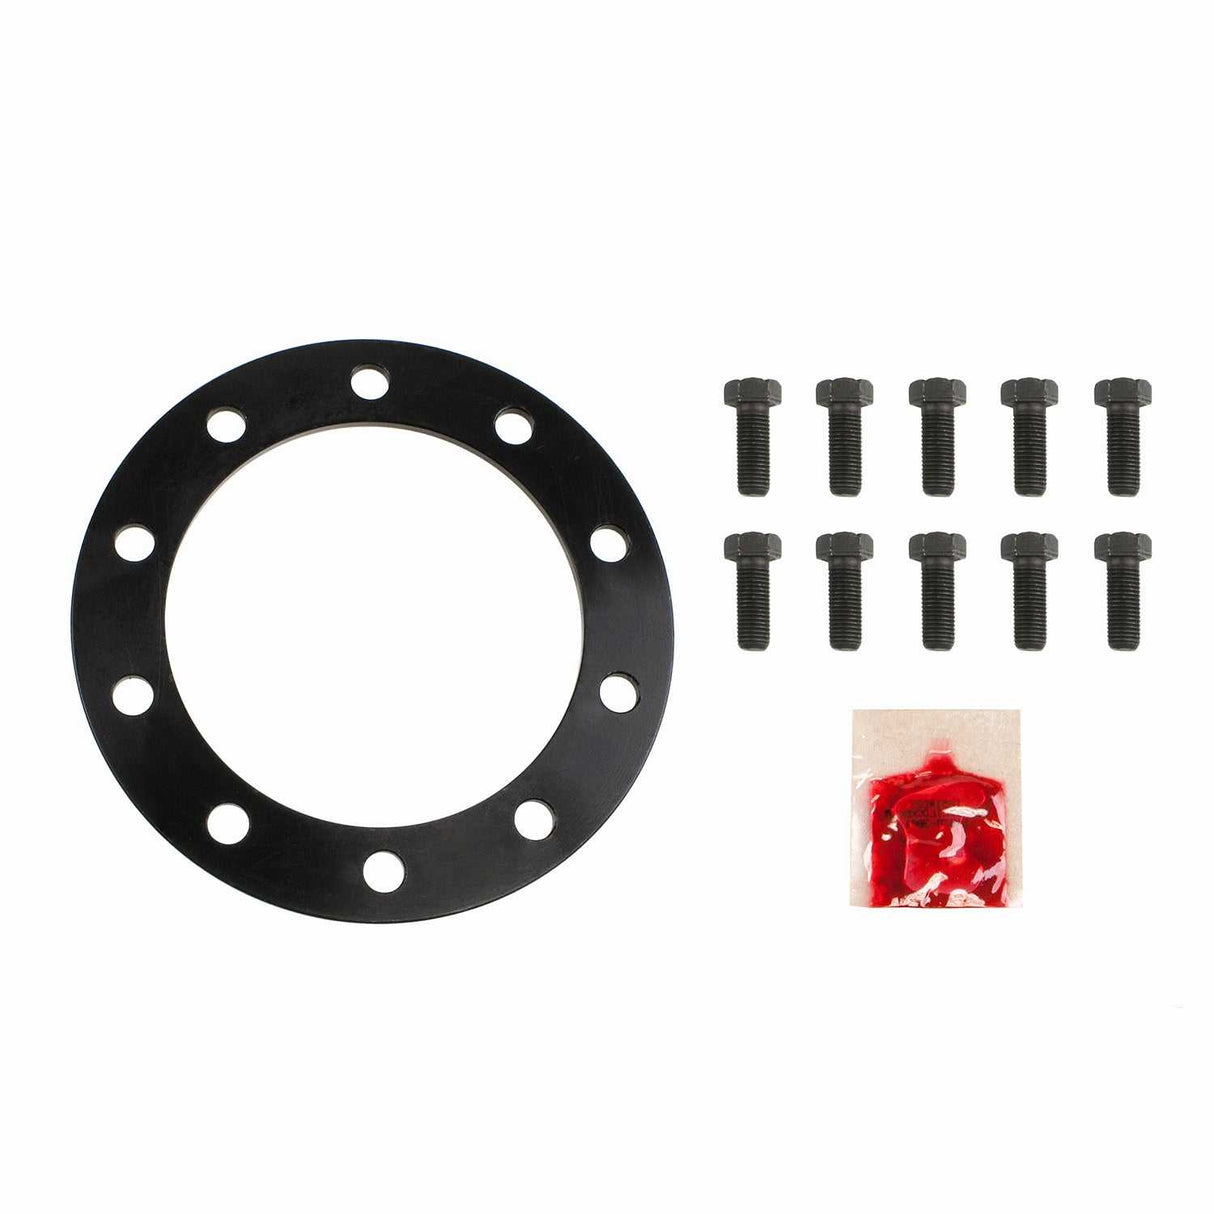 075050 Differential Ring Gear Spacer